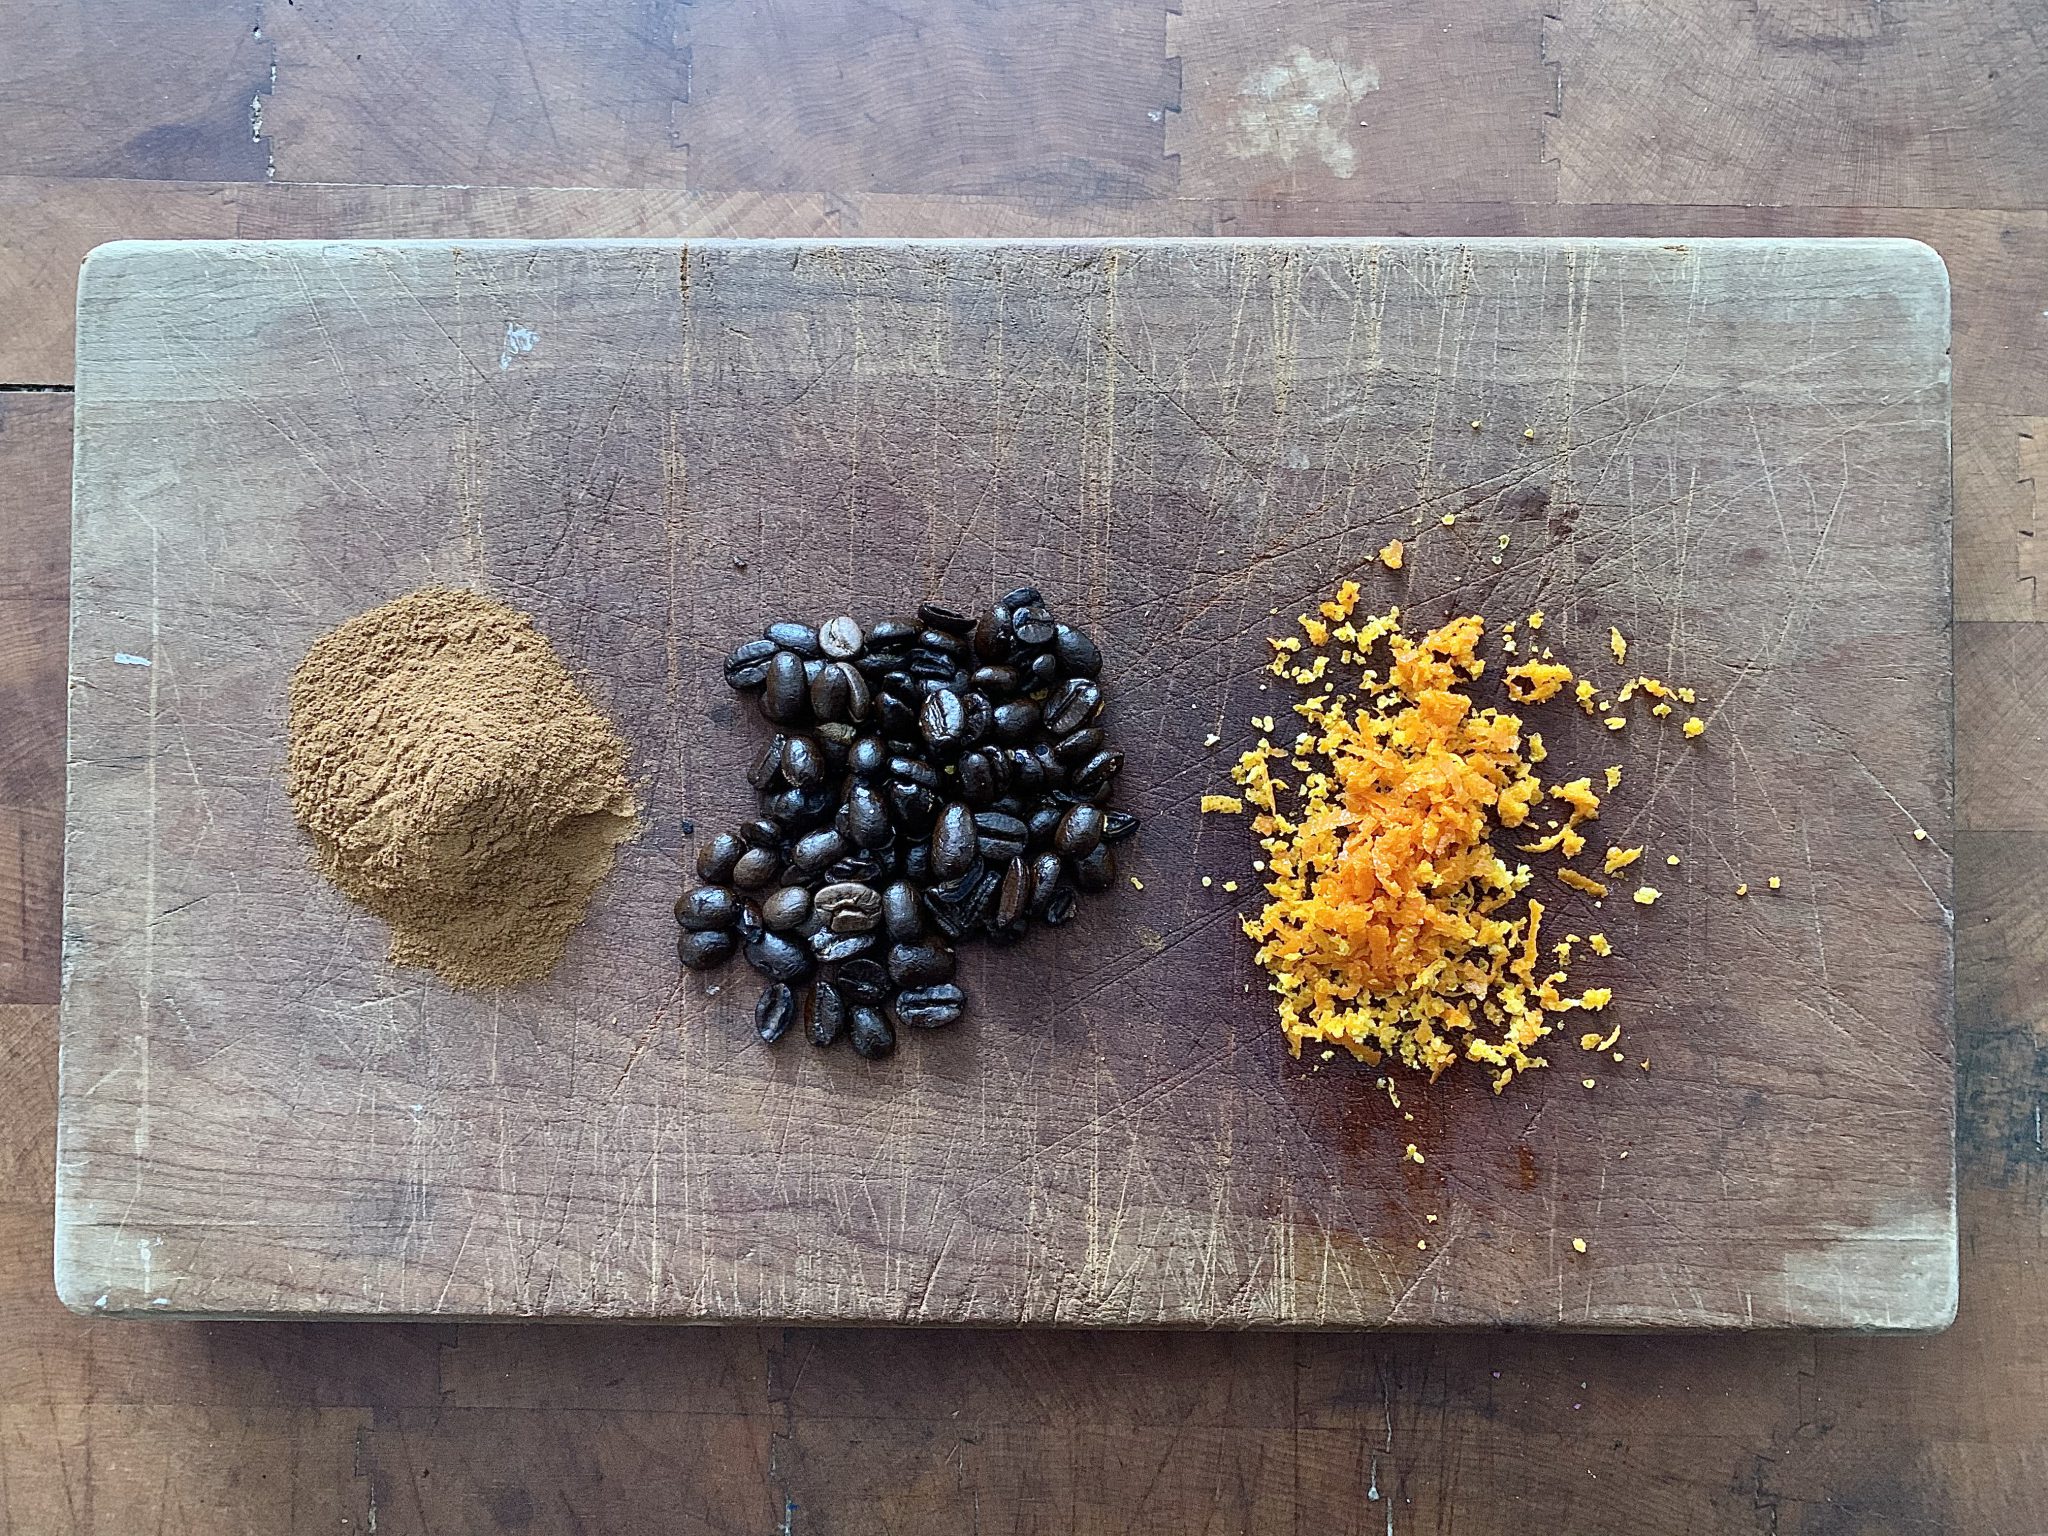 Prepare for taste-off: 3 of the 5 chili recipe ingredients